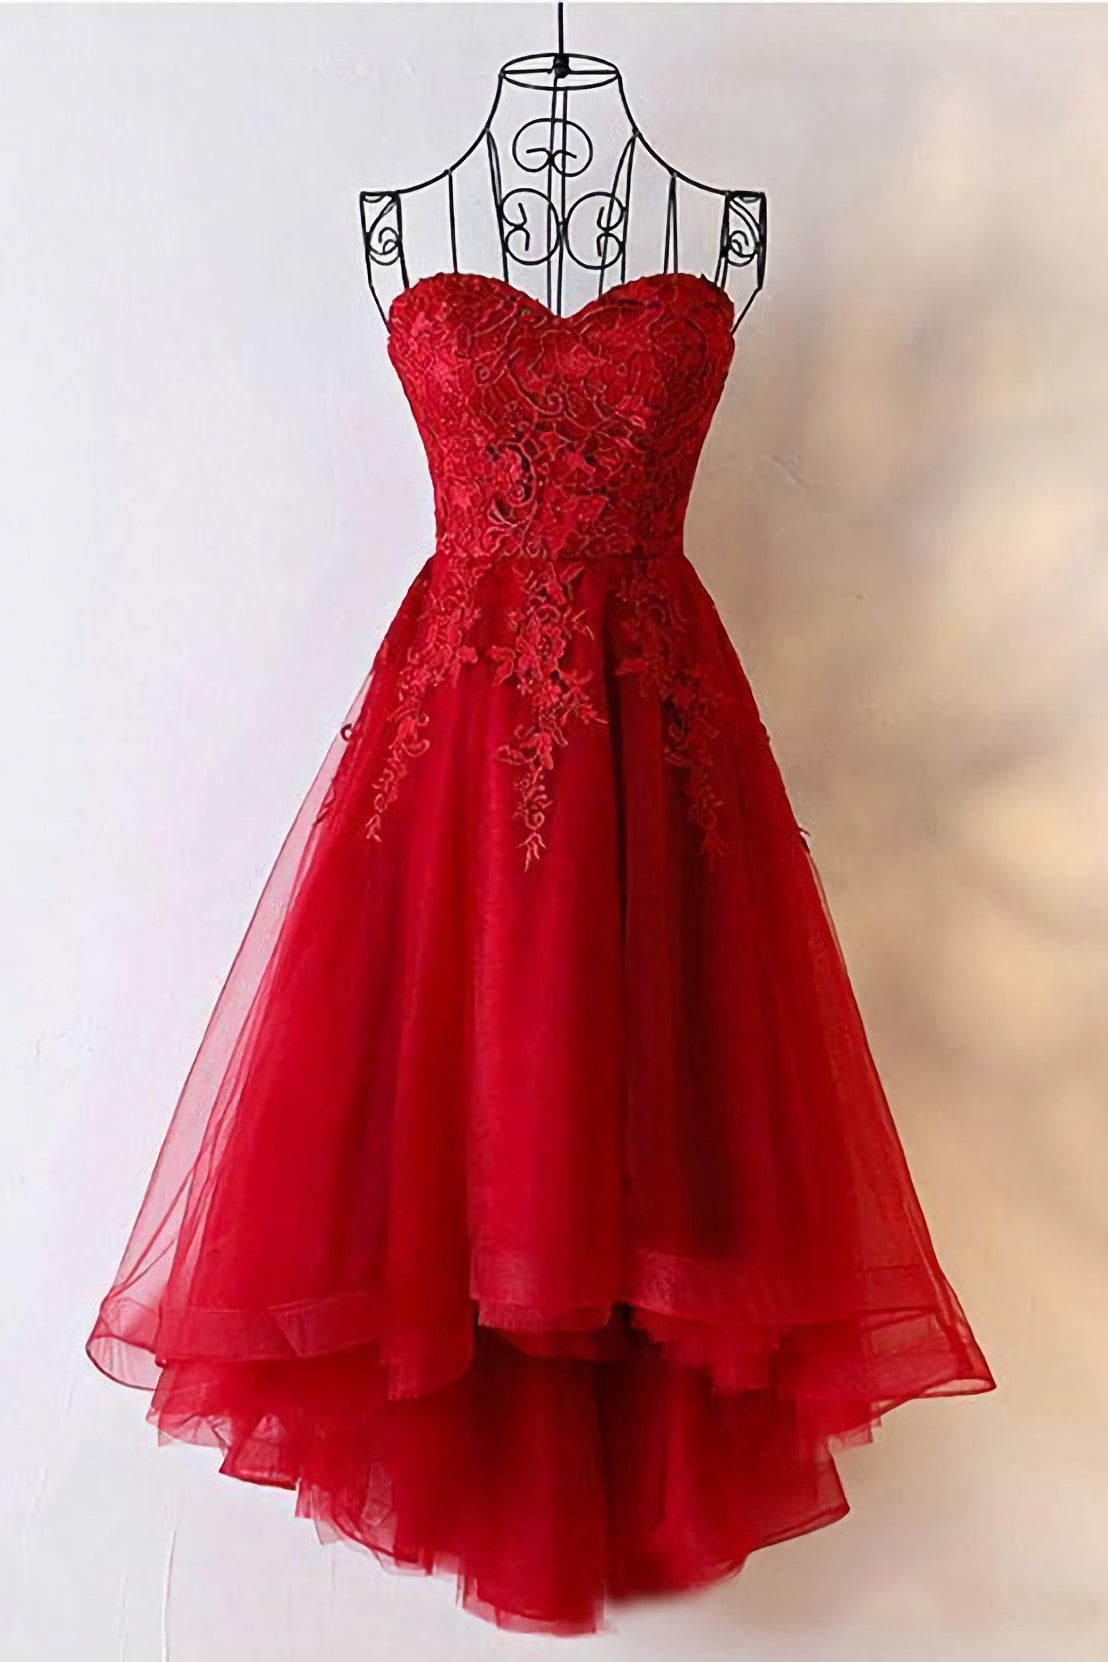 Cute Red Tulle Sweetheart Strapless Homecoming Dresses With Lace Short Prom Dresses